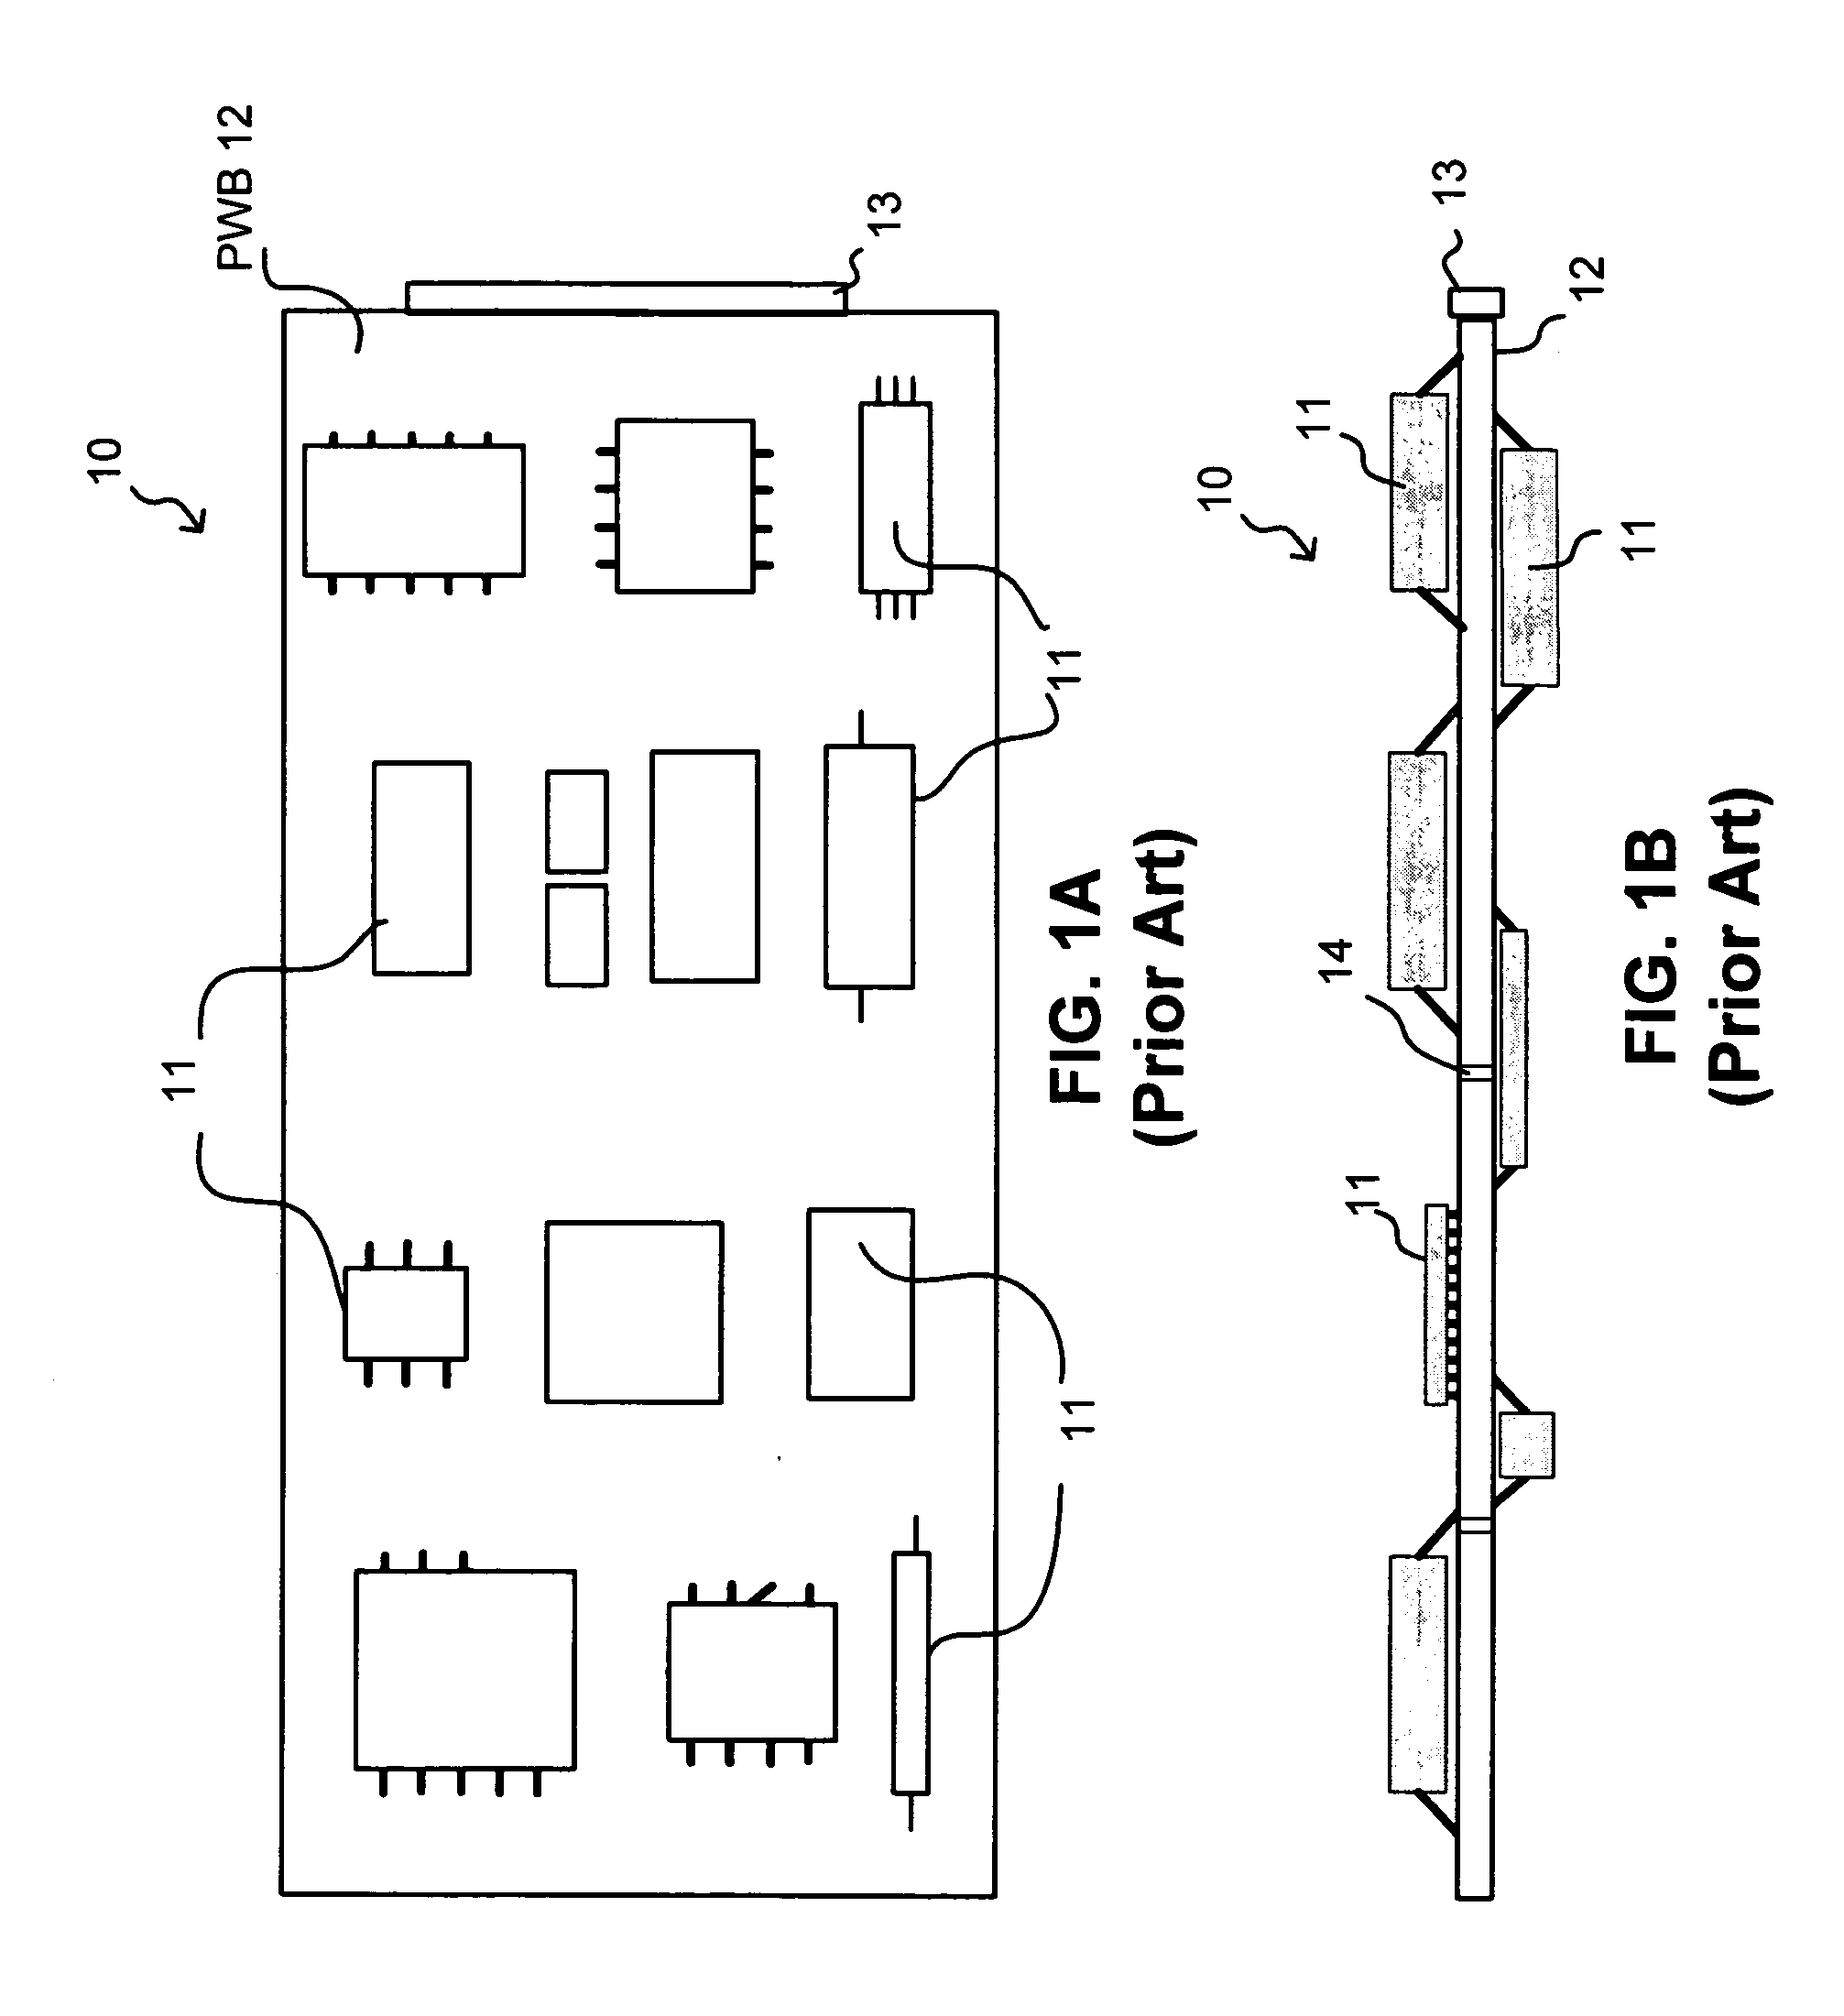 Environmentally tuned circuit card assembly and method for manufacturing the same